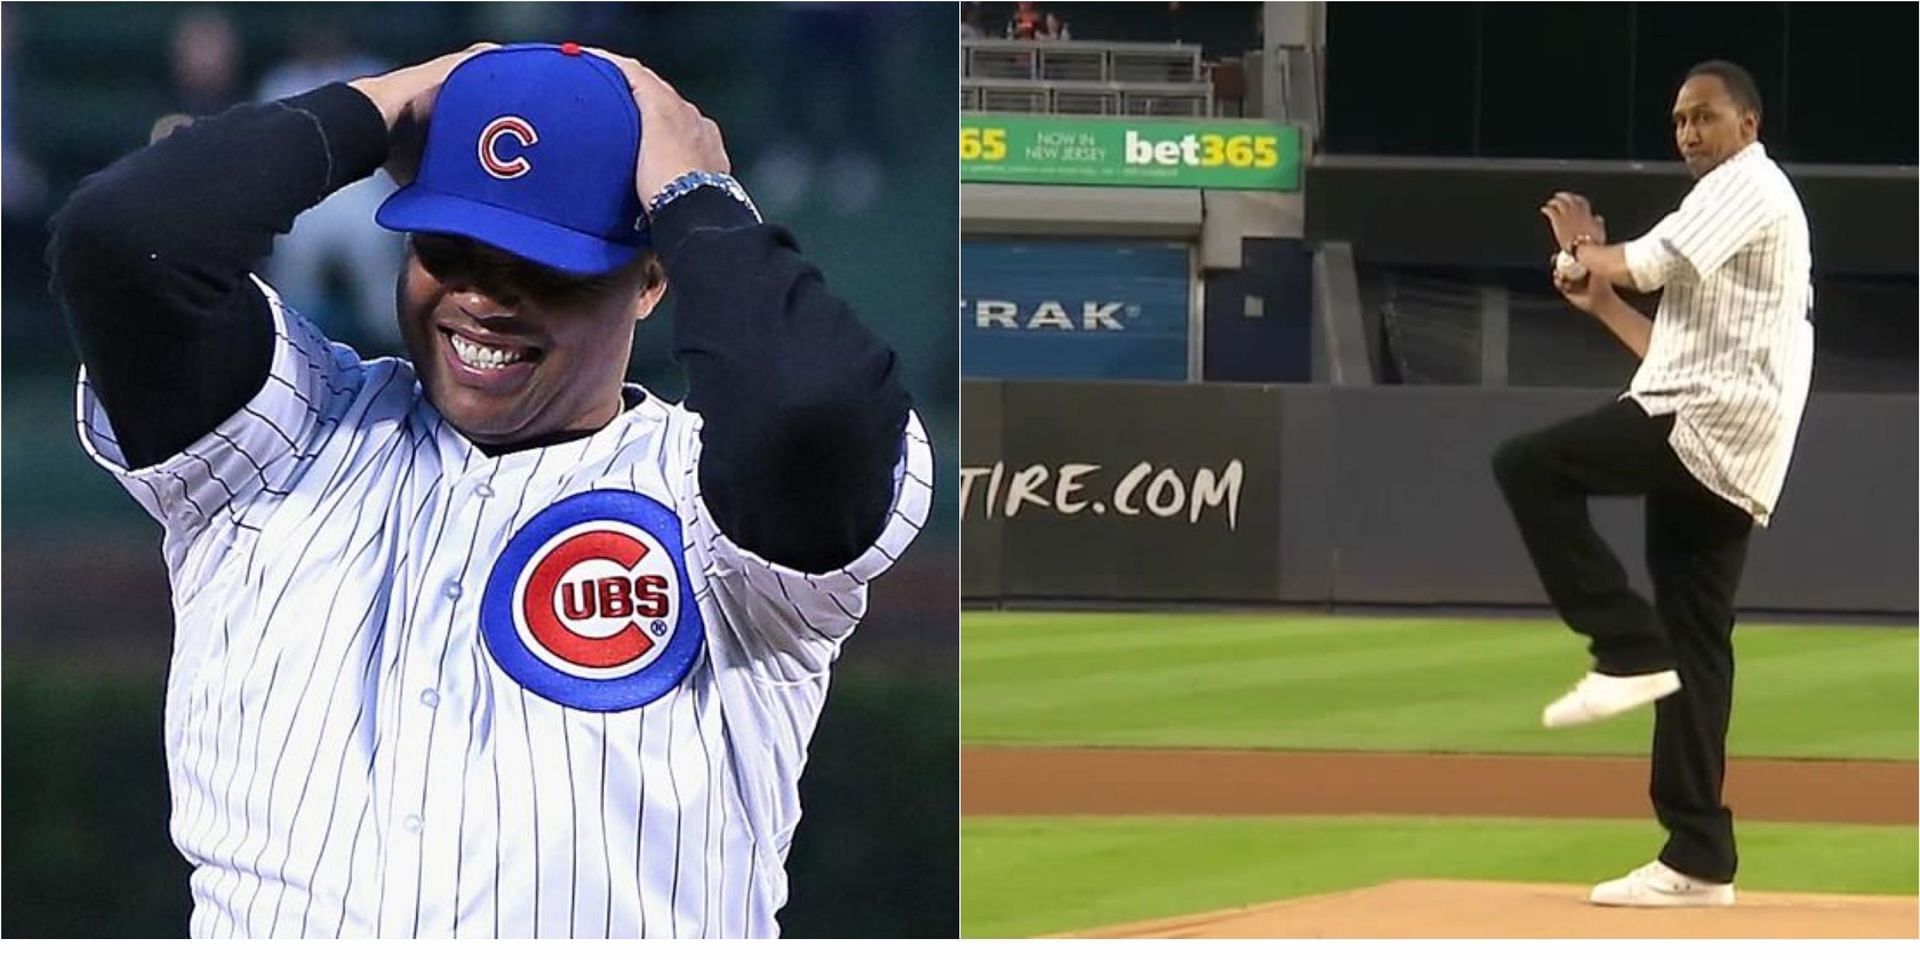 Charles Barkley hilariously compares his horrendous first pitch to Stephen A. Smith&rsquo;s